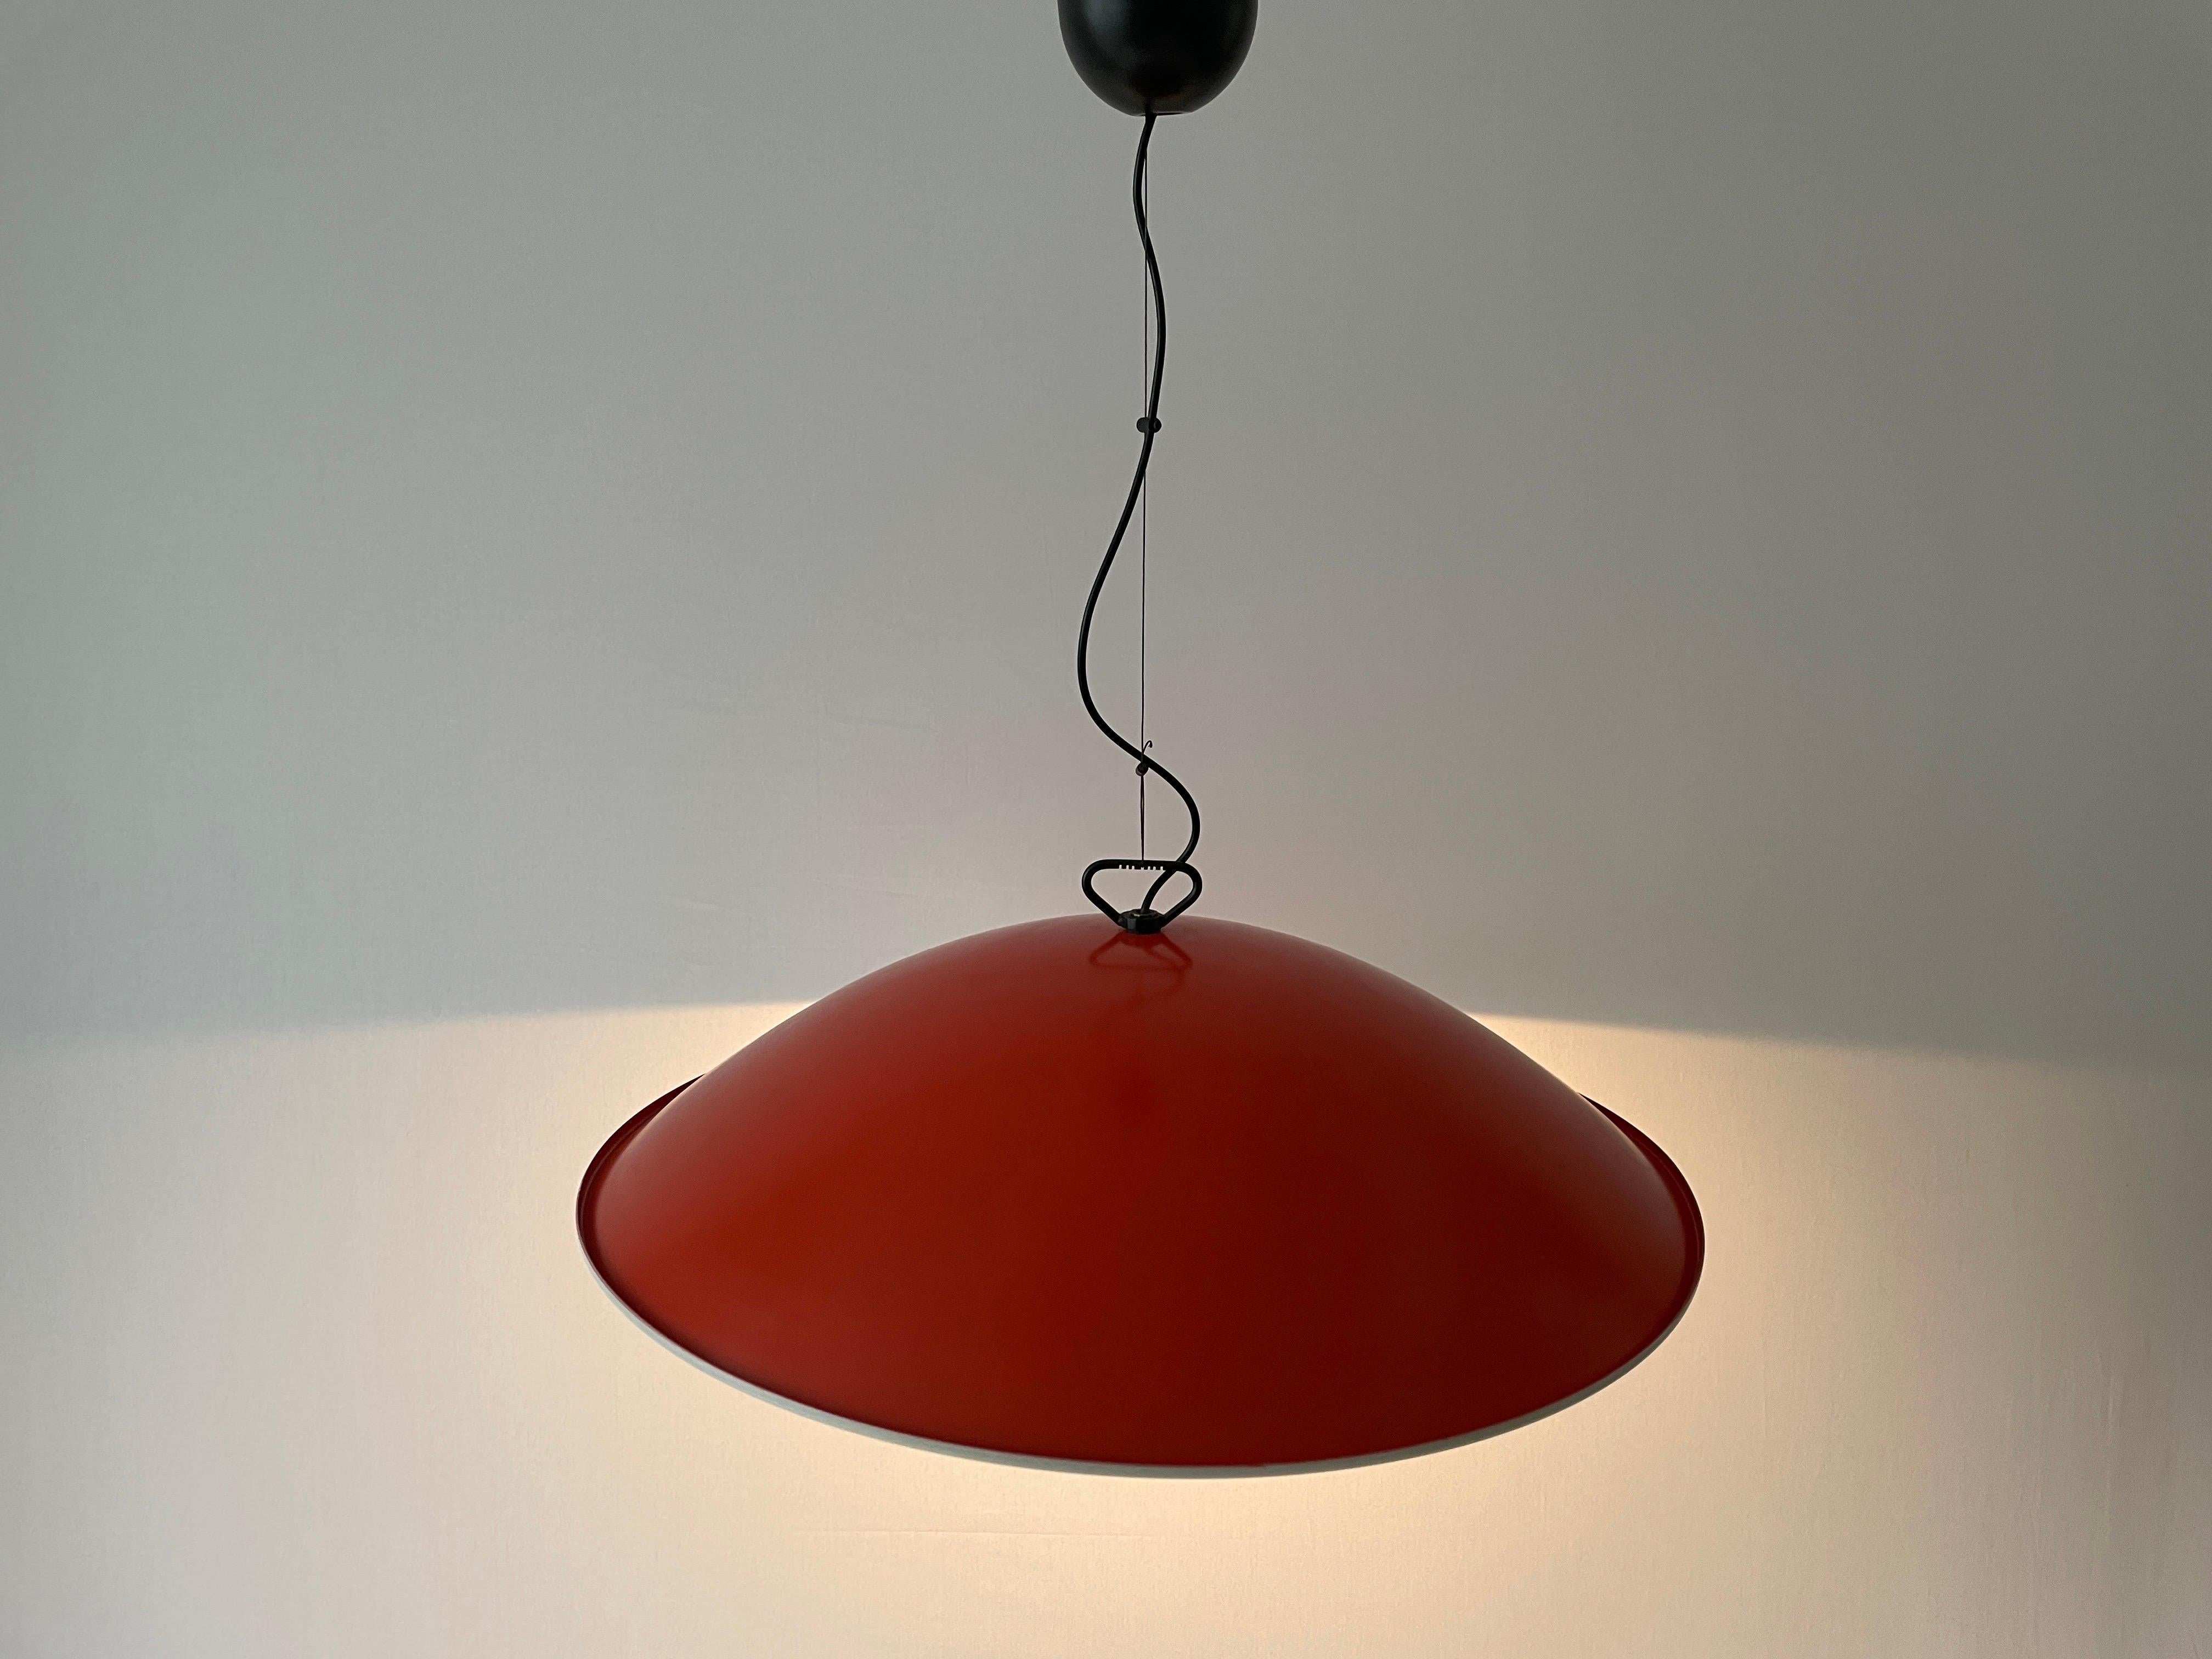 XXL Orange and White Metal Large Hotel Pendant Lamp, 1960s, Italy For Sale 5